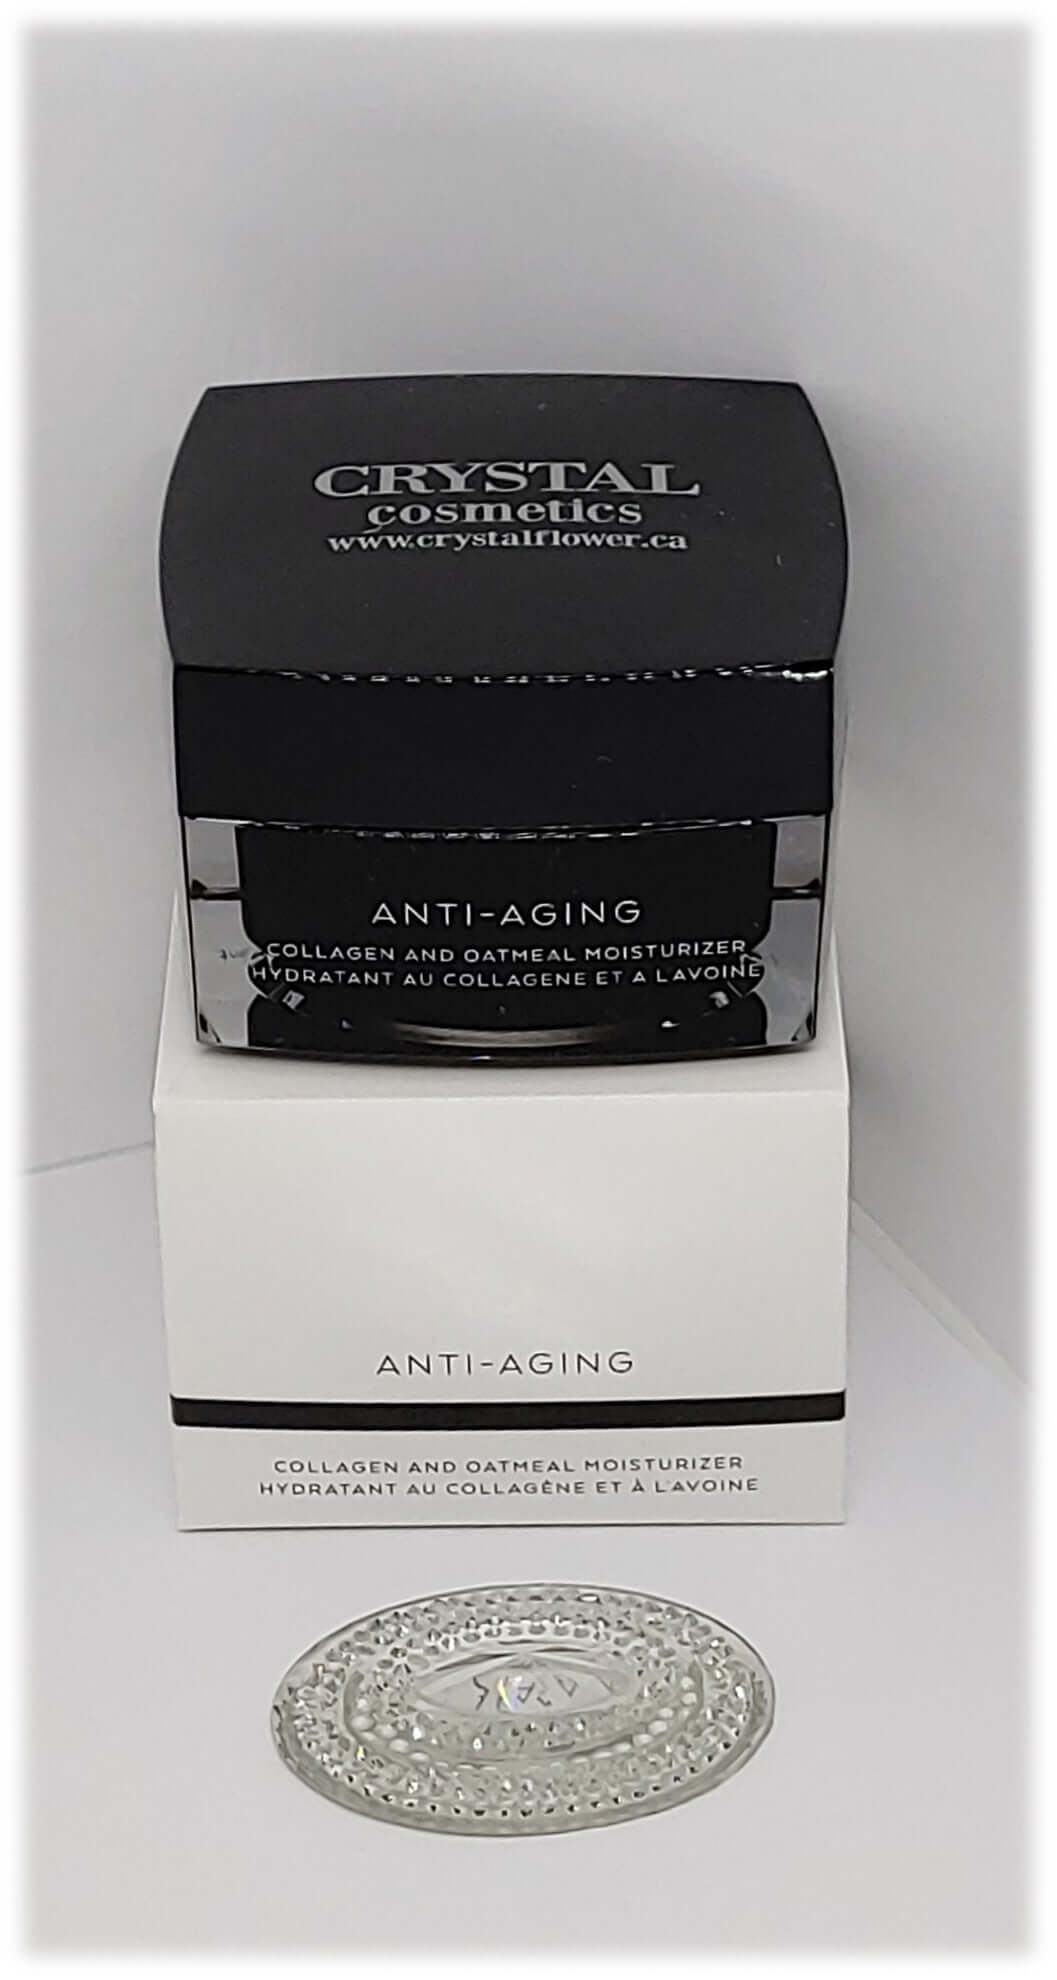 Anti-Aging:  Moisturizer with Collagen and Oatmeal - Crystal Flower